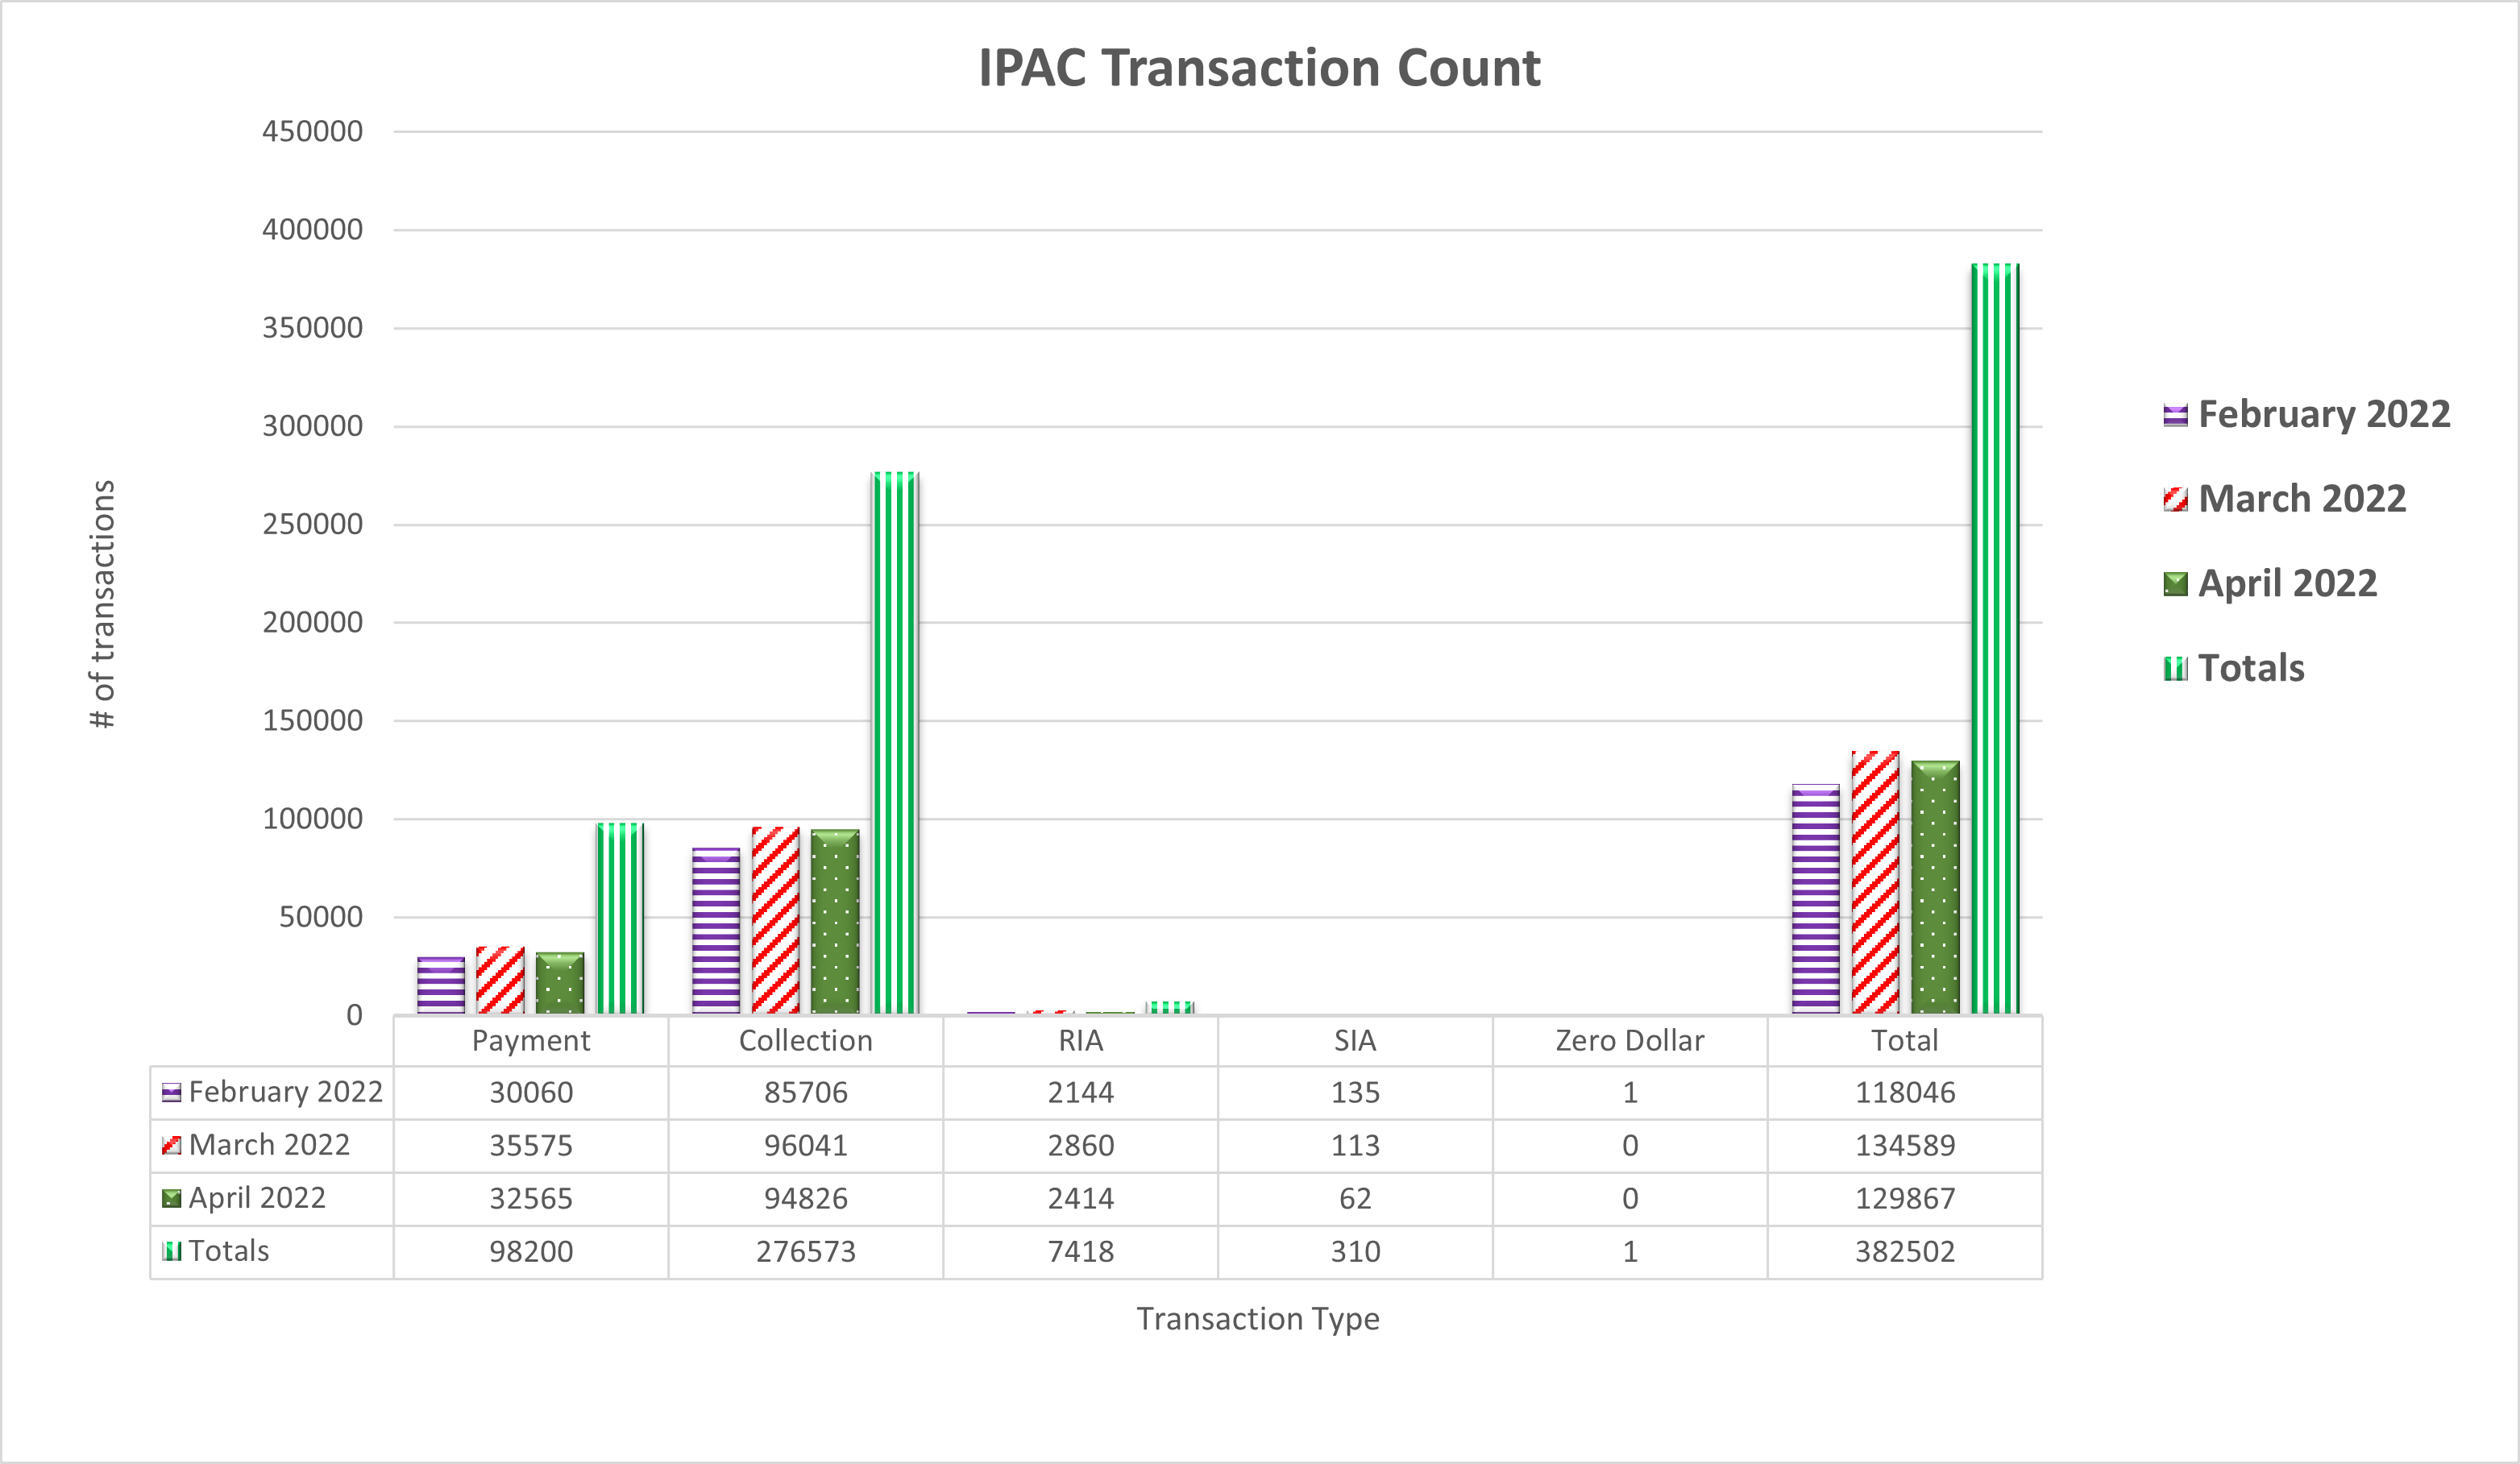 IPAC Transaction Count February 2022 through April 2022